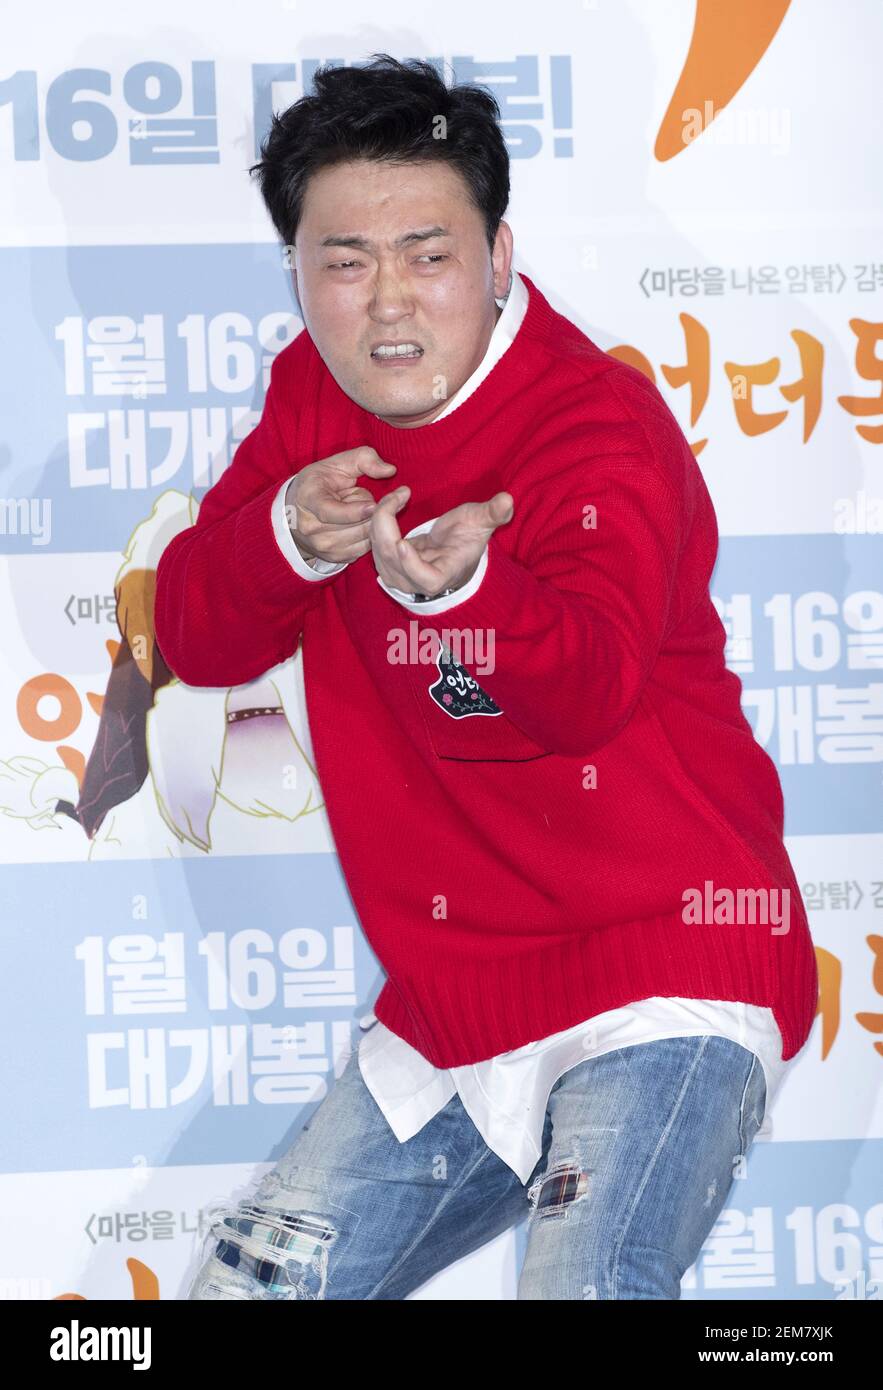 7 January 2019 - Seoul, South korea : South Korean actor Lee Jun-hyeok,  attends photo call for the South Korean Animated film 'Underdog Premiere at  CGV Cinema in Seoul, South Korea on